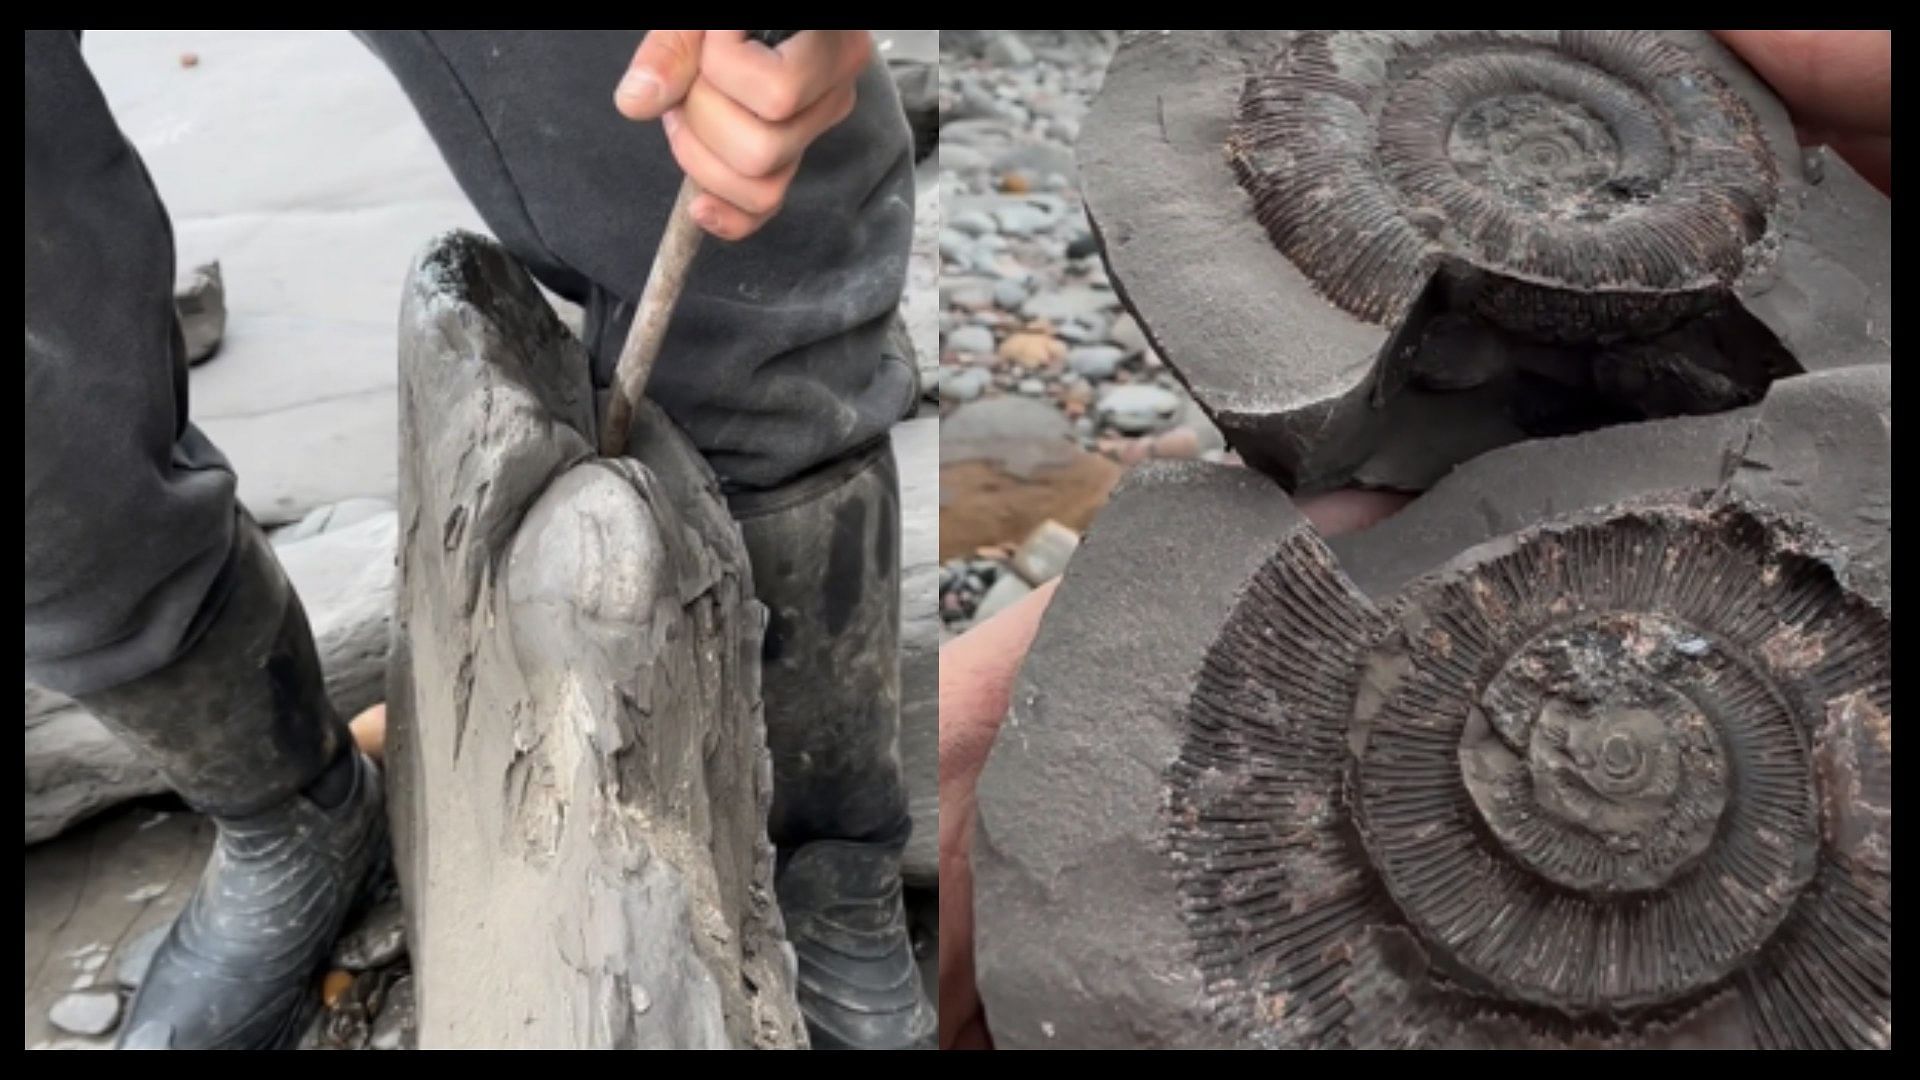 18 million years old fossil found shale rock on beach video viral on social media